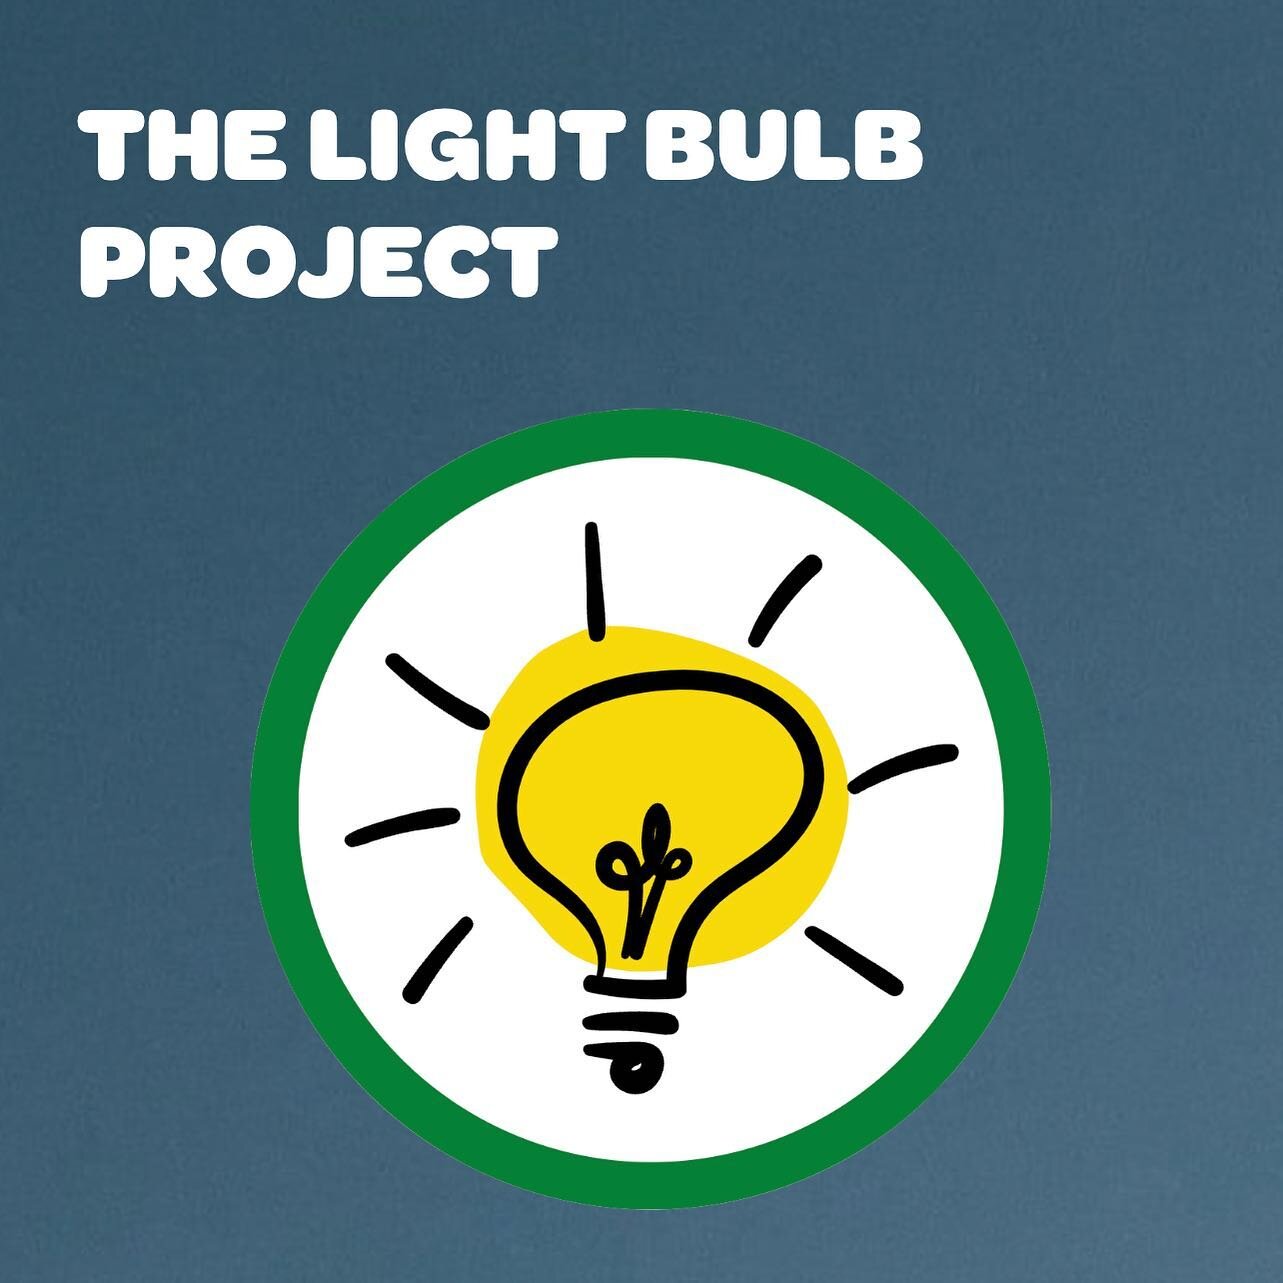 The Light Bulb Project is our campaign to encourage more Greenwich businesses to switch to LED light bulbs. 

According to the Department of Energy, LED light bulbs use 90% less energy and last 25 times longer than traditional bulbs. By increasing LE